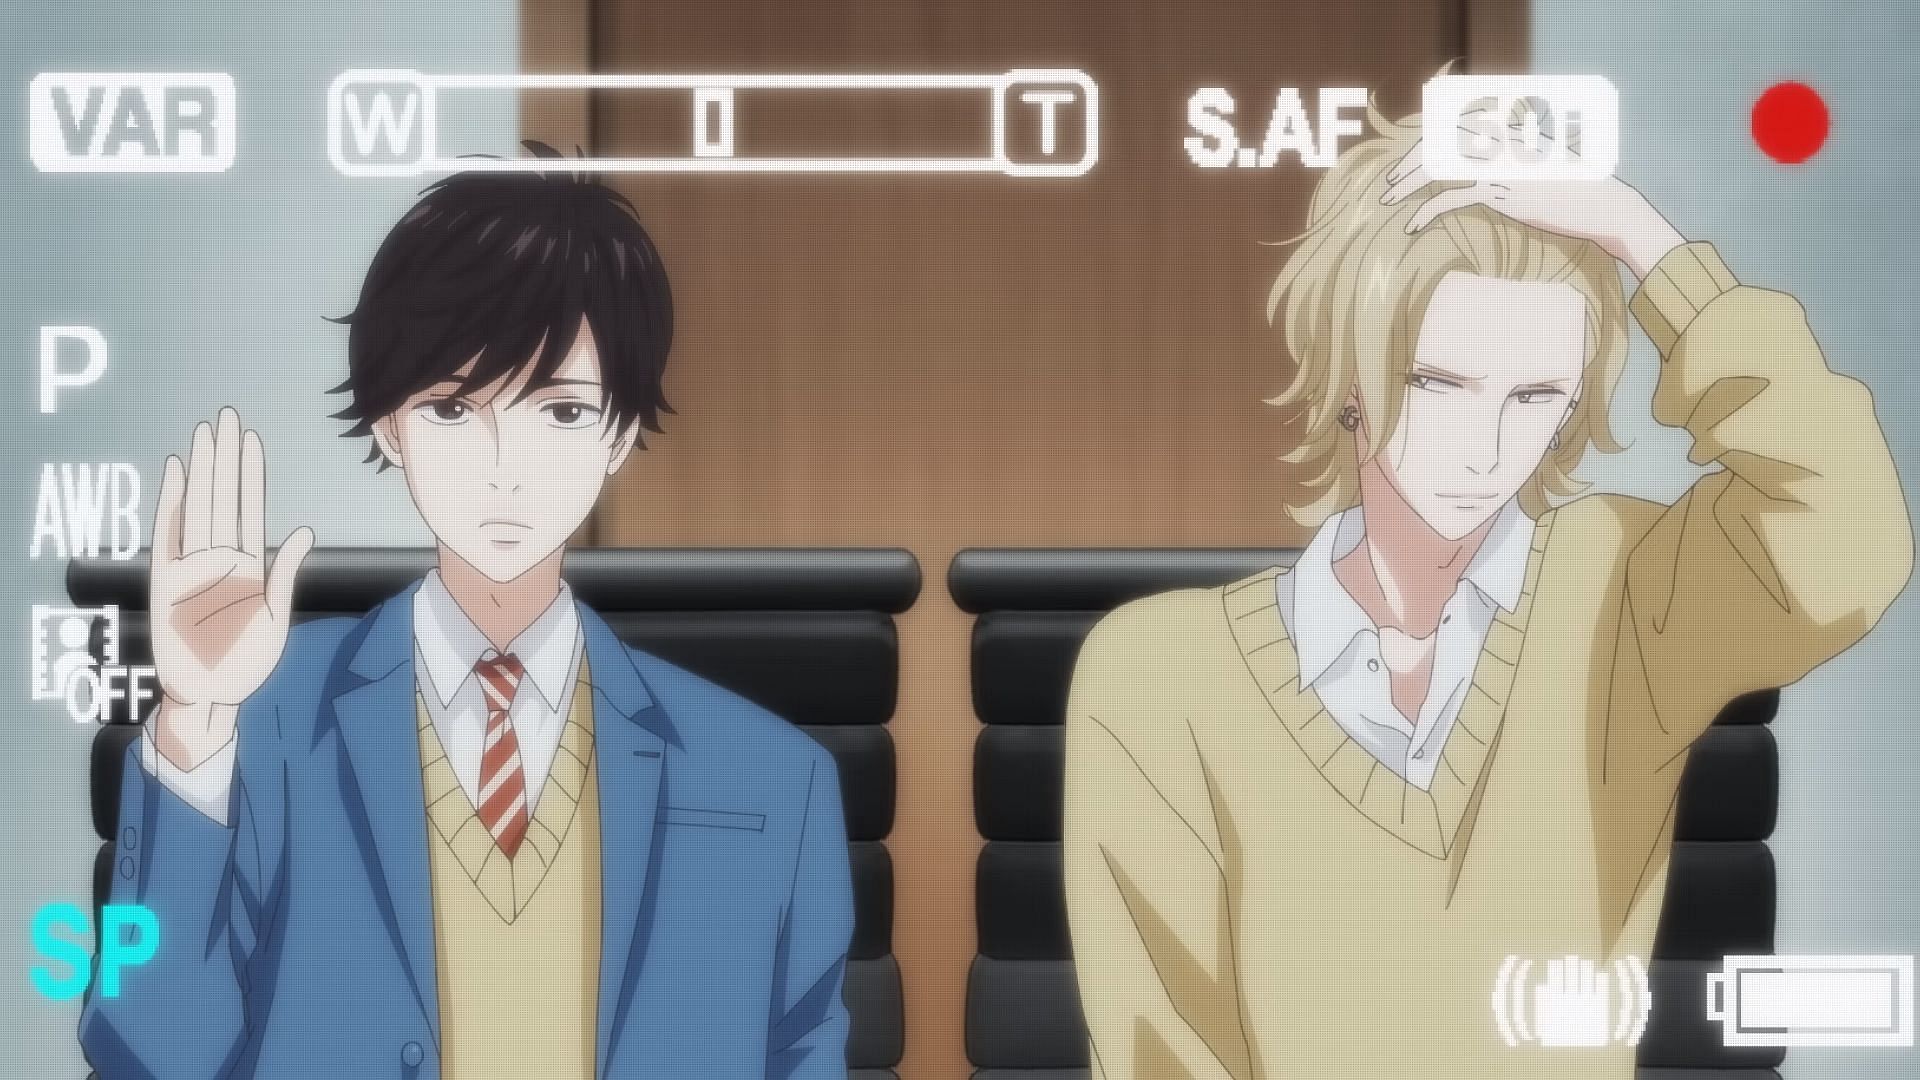 Mao and Hisashi in Twilight Out of Focus episode 1 trailer (Image via Studio Deen)